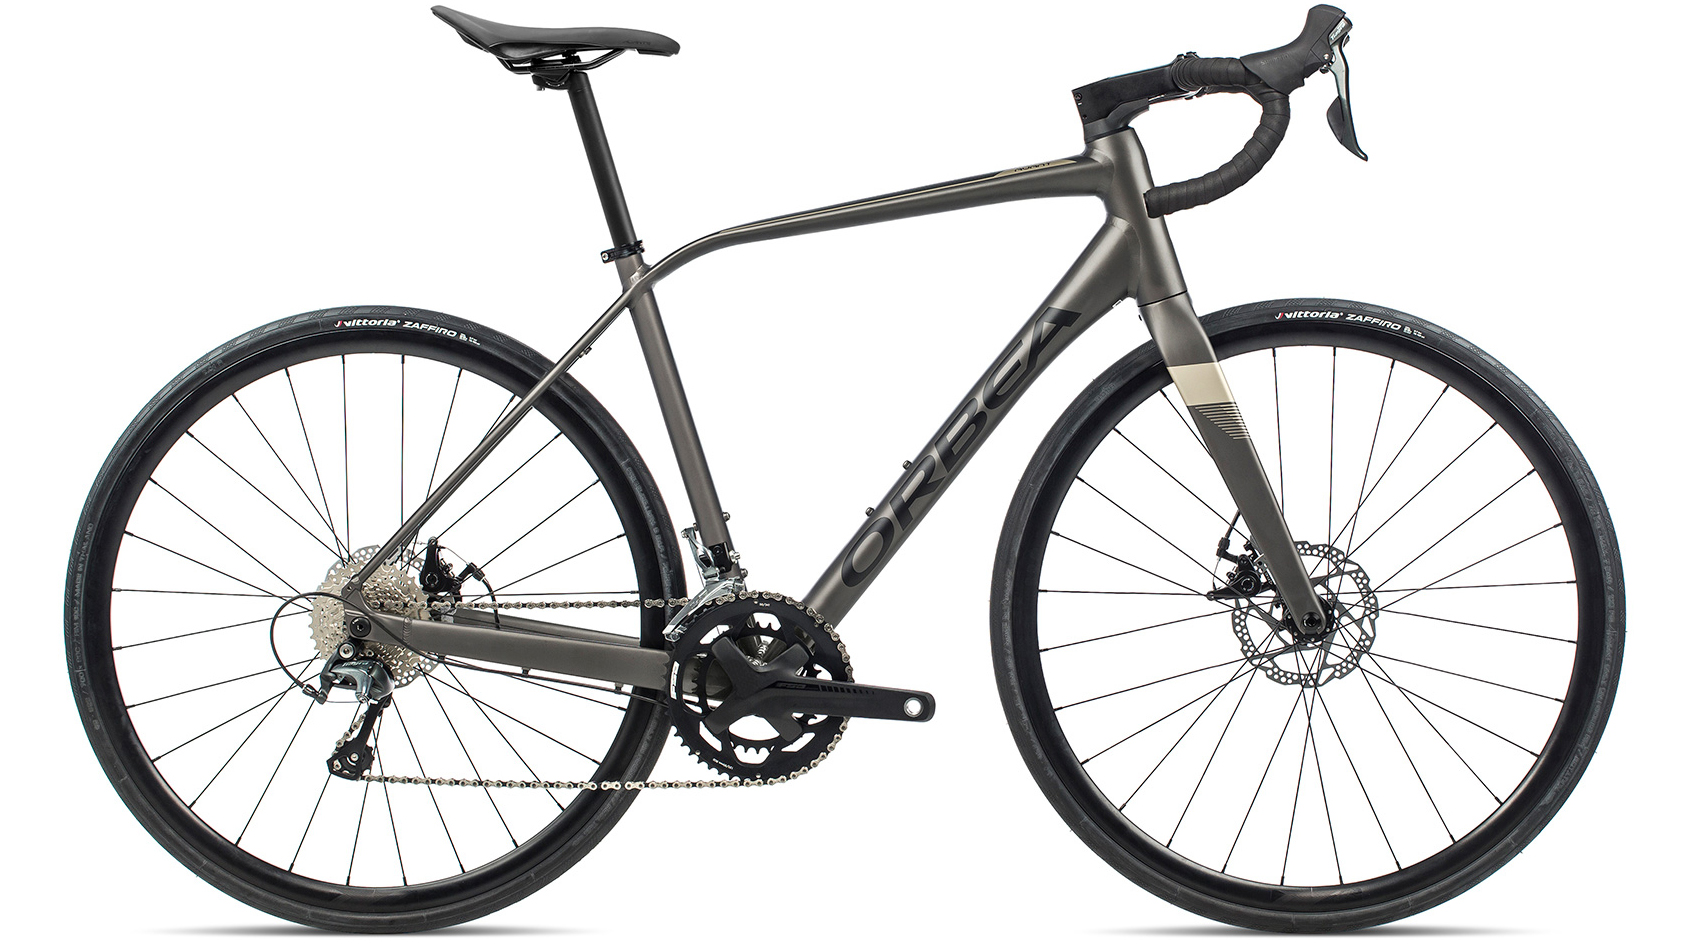 Grey Orbea Avant H40-D road bike with Shimano Tiagra groupset and disc brakes